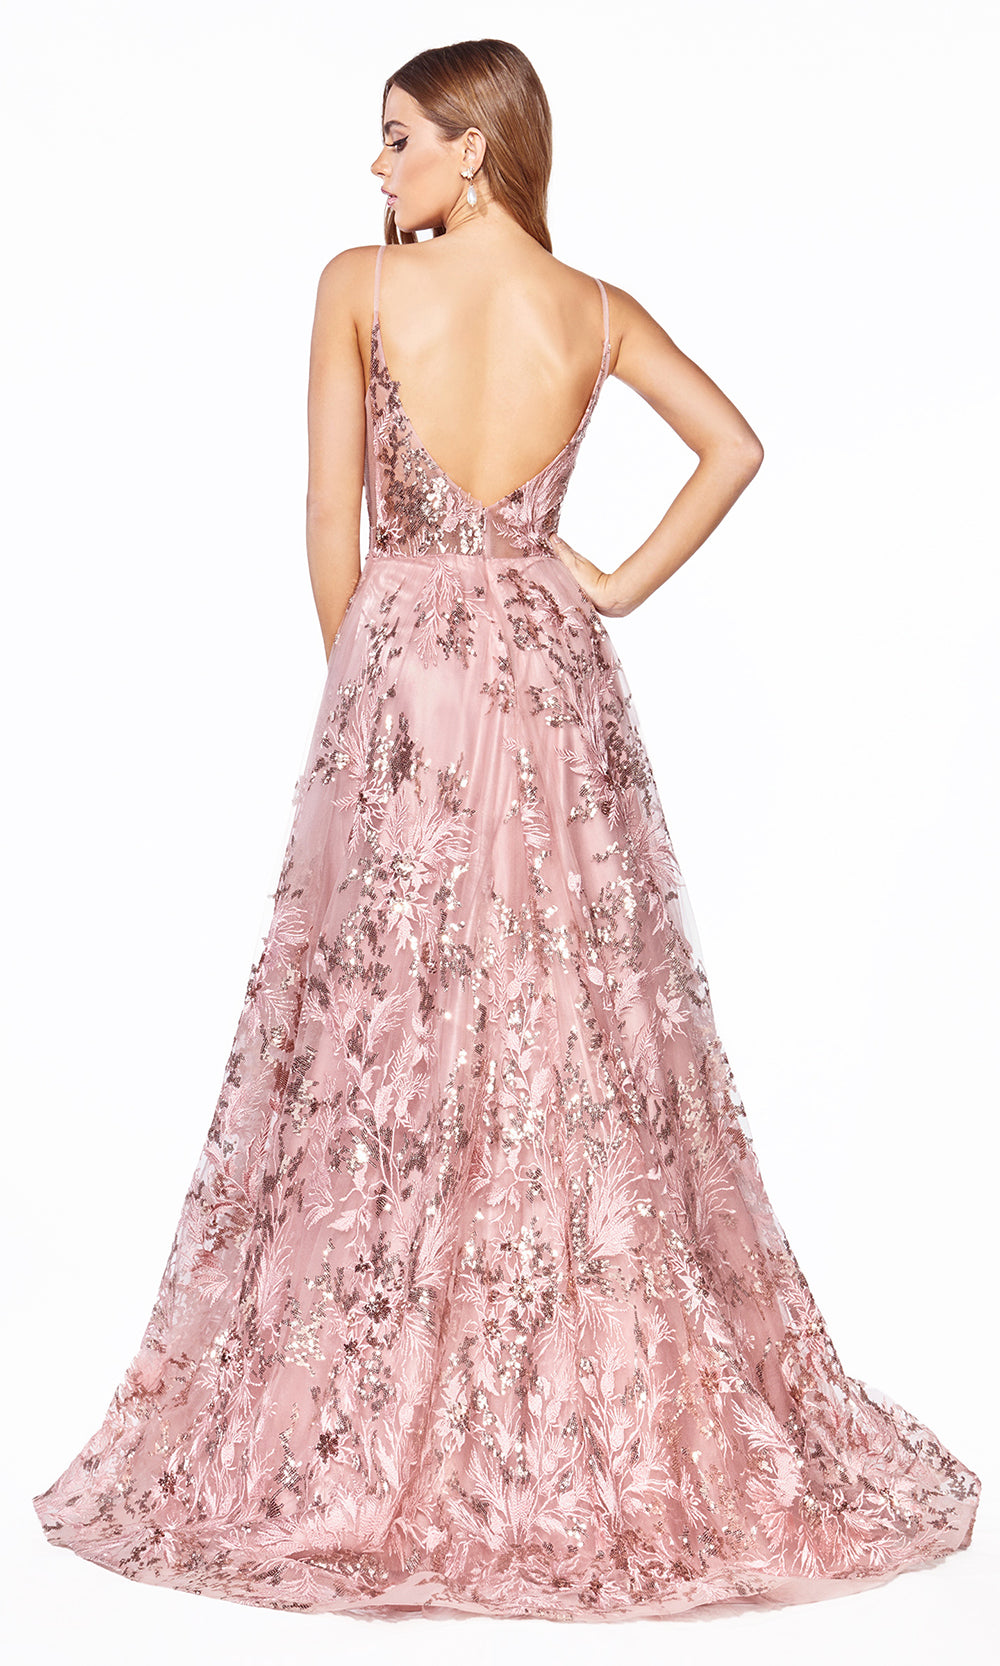 Cinderella Divine CB048 long rose gold flowy v neck glittery dress w/ tulle skirt & straps. Rose gold dress is perfect for black tie event, prom, indowestern gown, wedding reception/engagement dress, formal wedding guest dress. Plus sizes avail-back